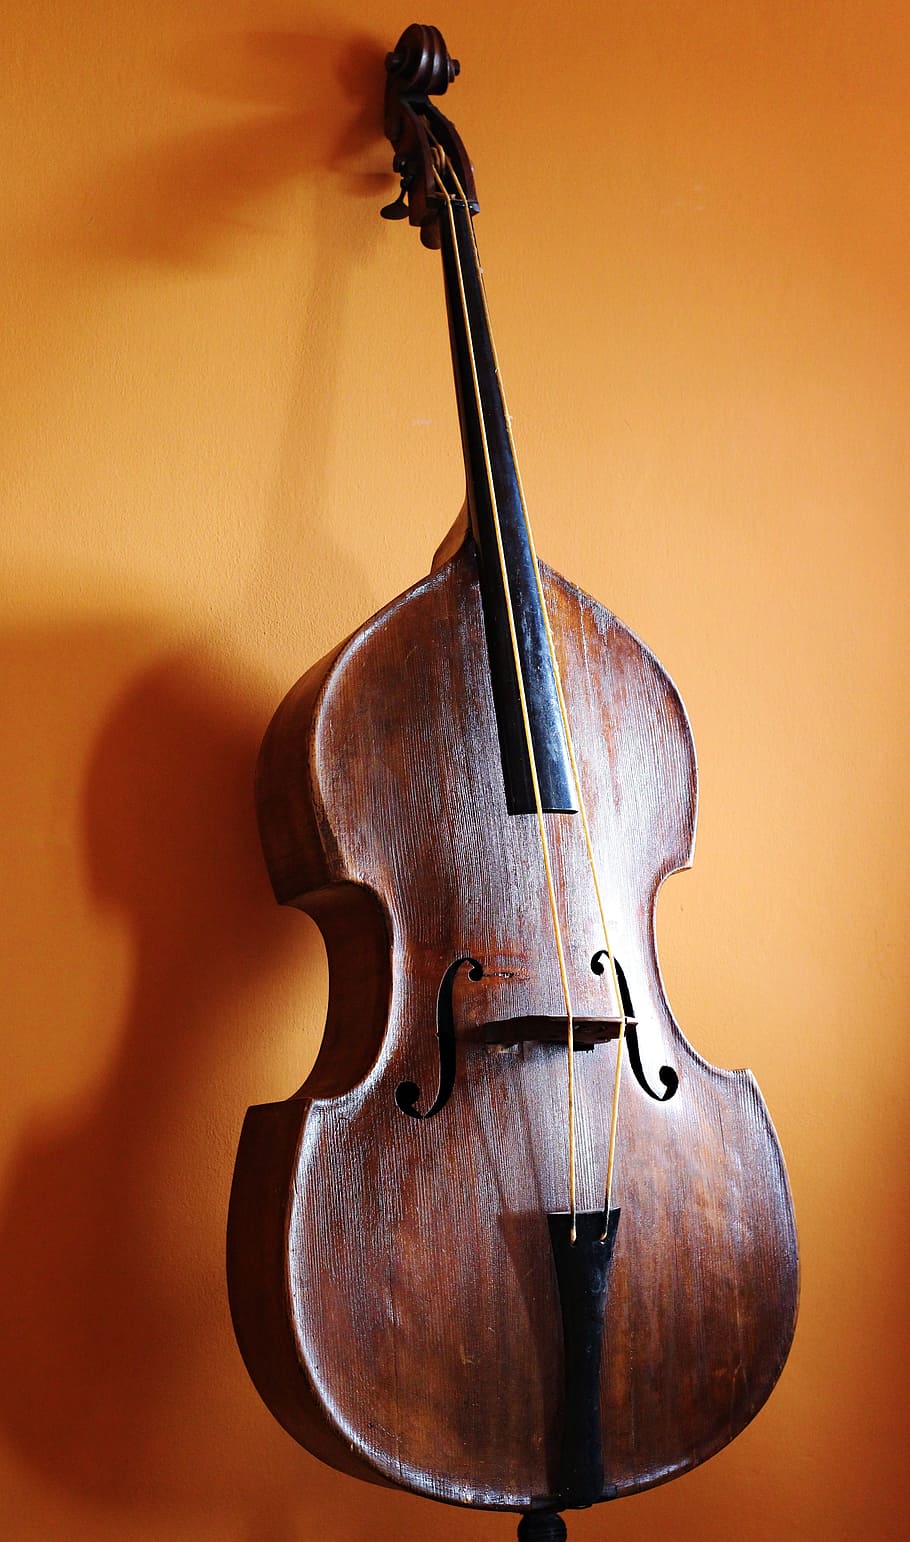 brown cello, wood, classic, instrument, wooden, bowed stringed instrument, violin, music, art, antique